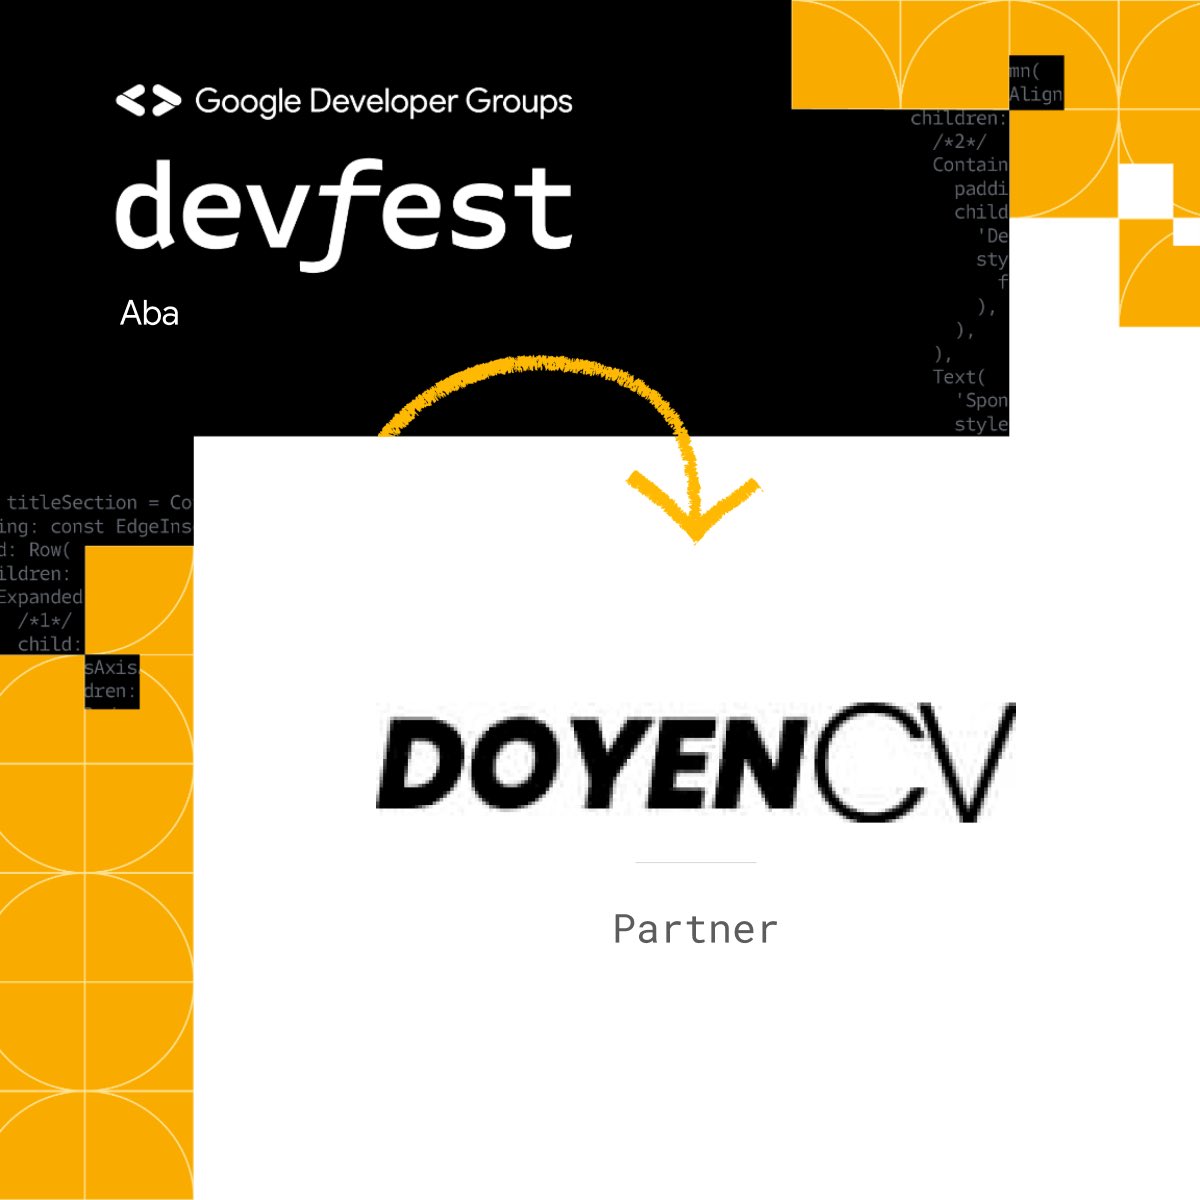 We are excited to announce @DoyenCV as a partner. 

Doyencv is striving to bridge the gap between job providers and job seekers and so far has been succeeding greatly, gathering young, brilliant, and qualified minds and helping them attain the jobs they desire and deserve.